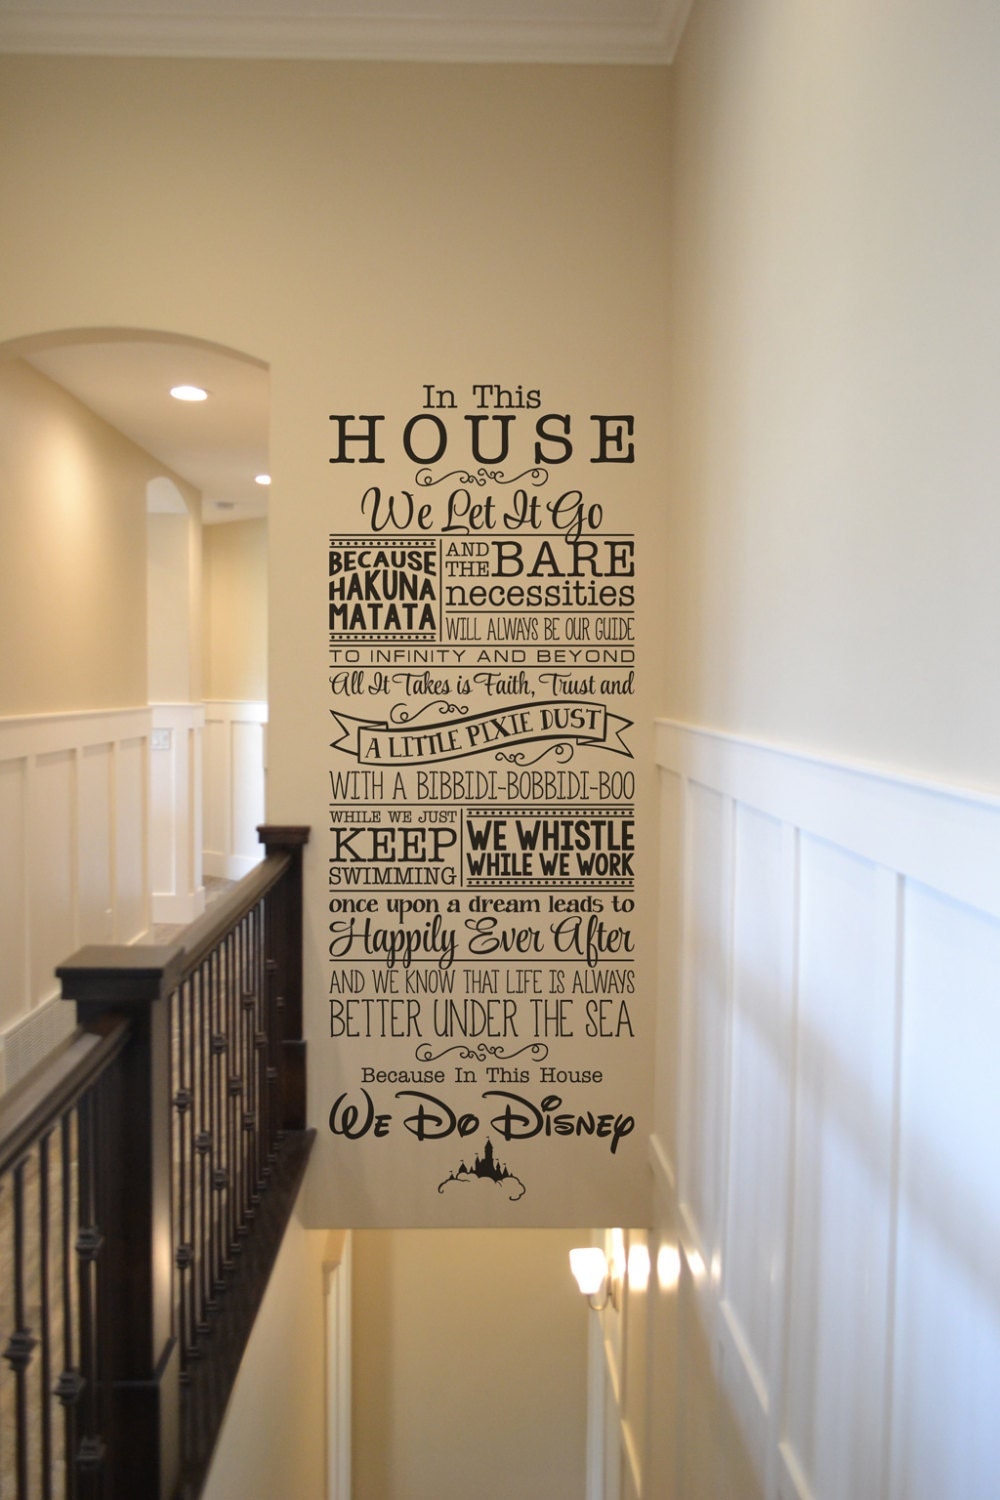 We Do Disney \/ Disney wall decal BM544 quote wall decal vinyl